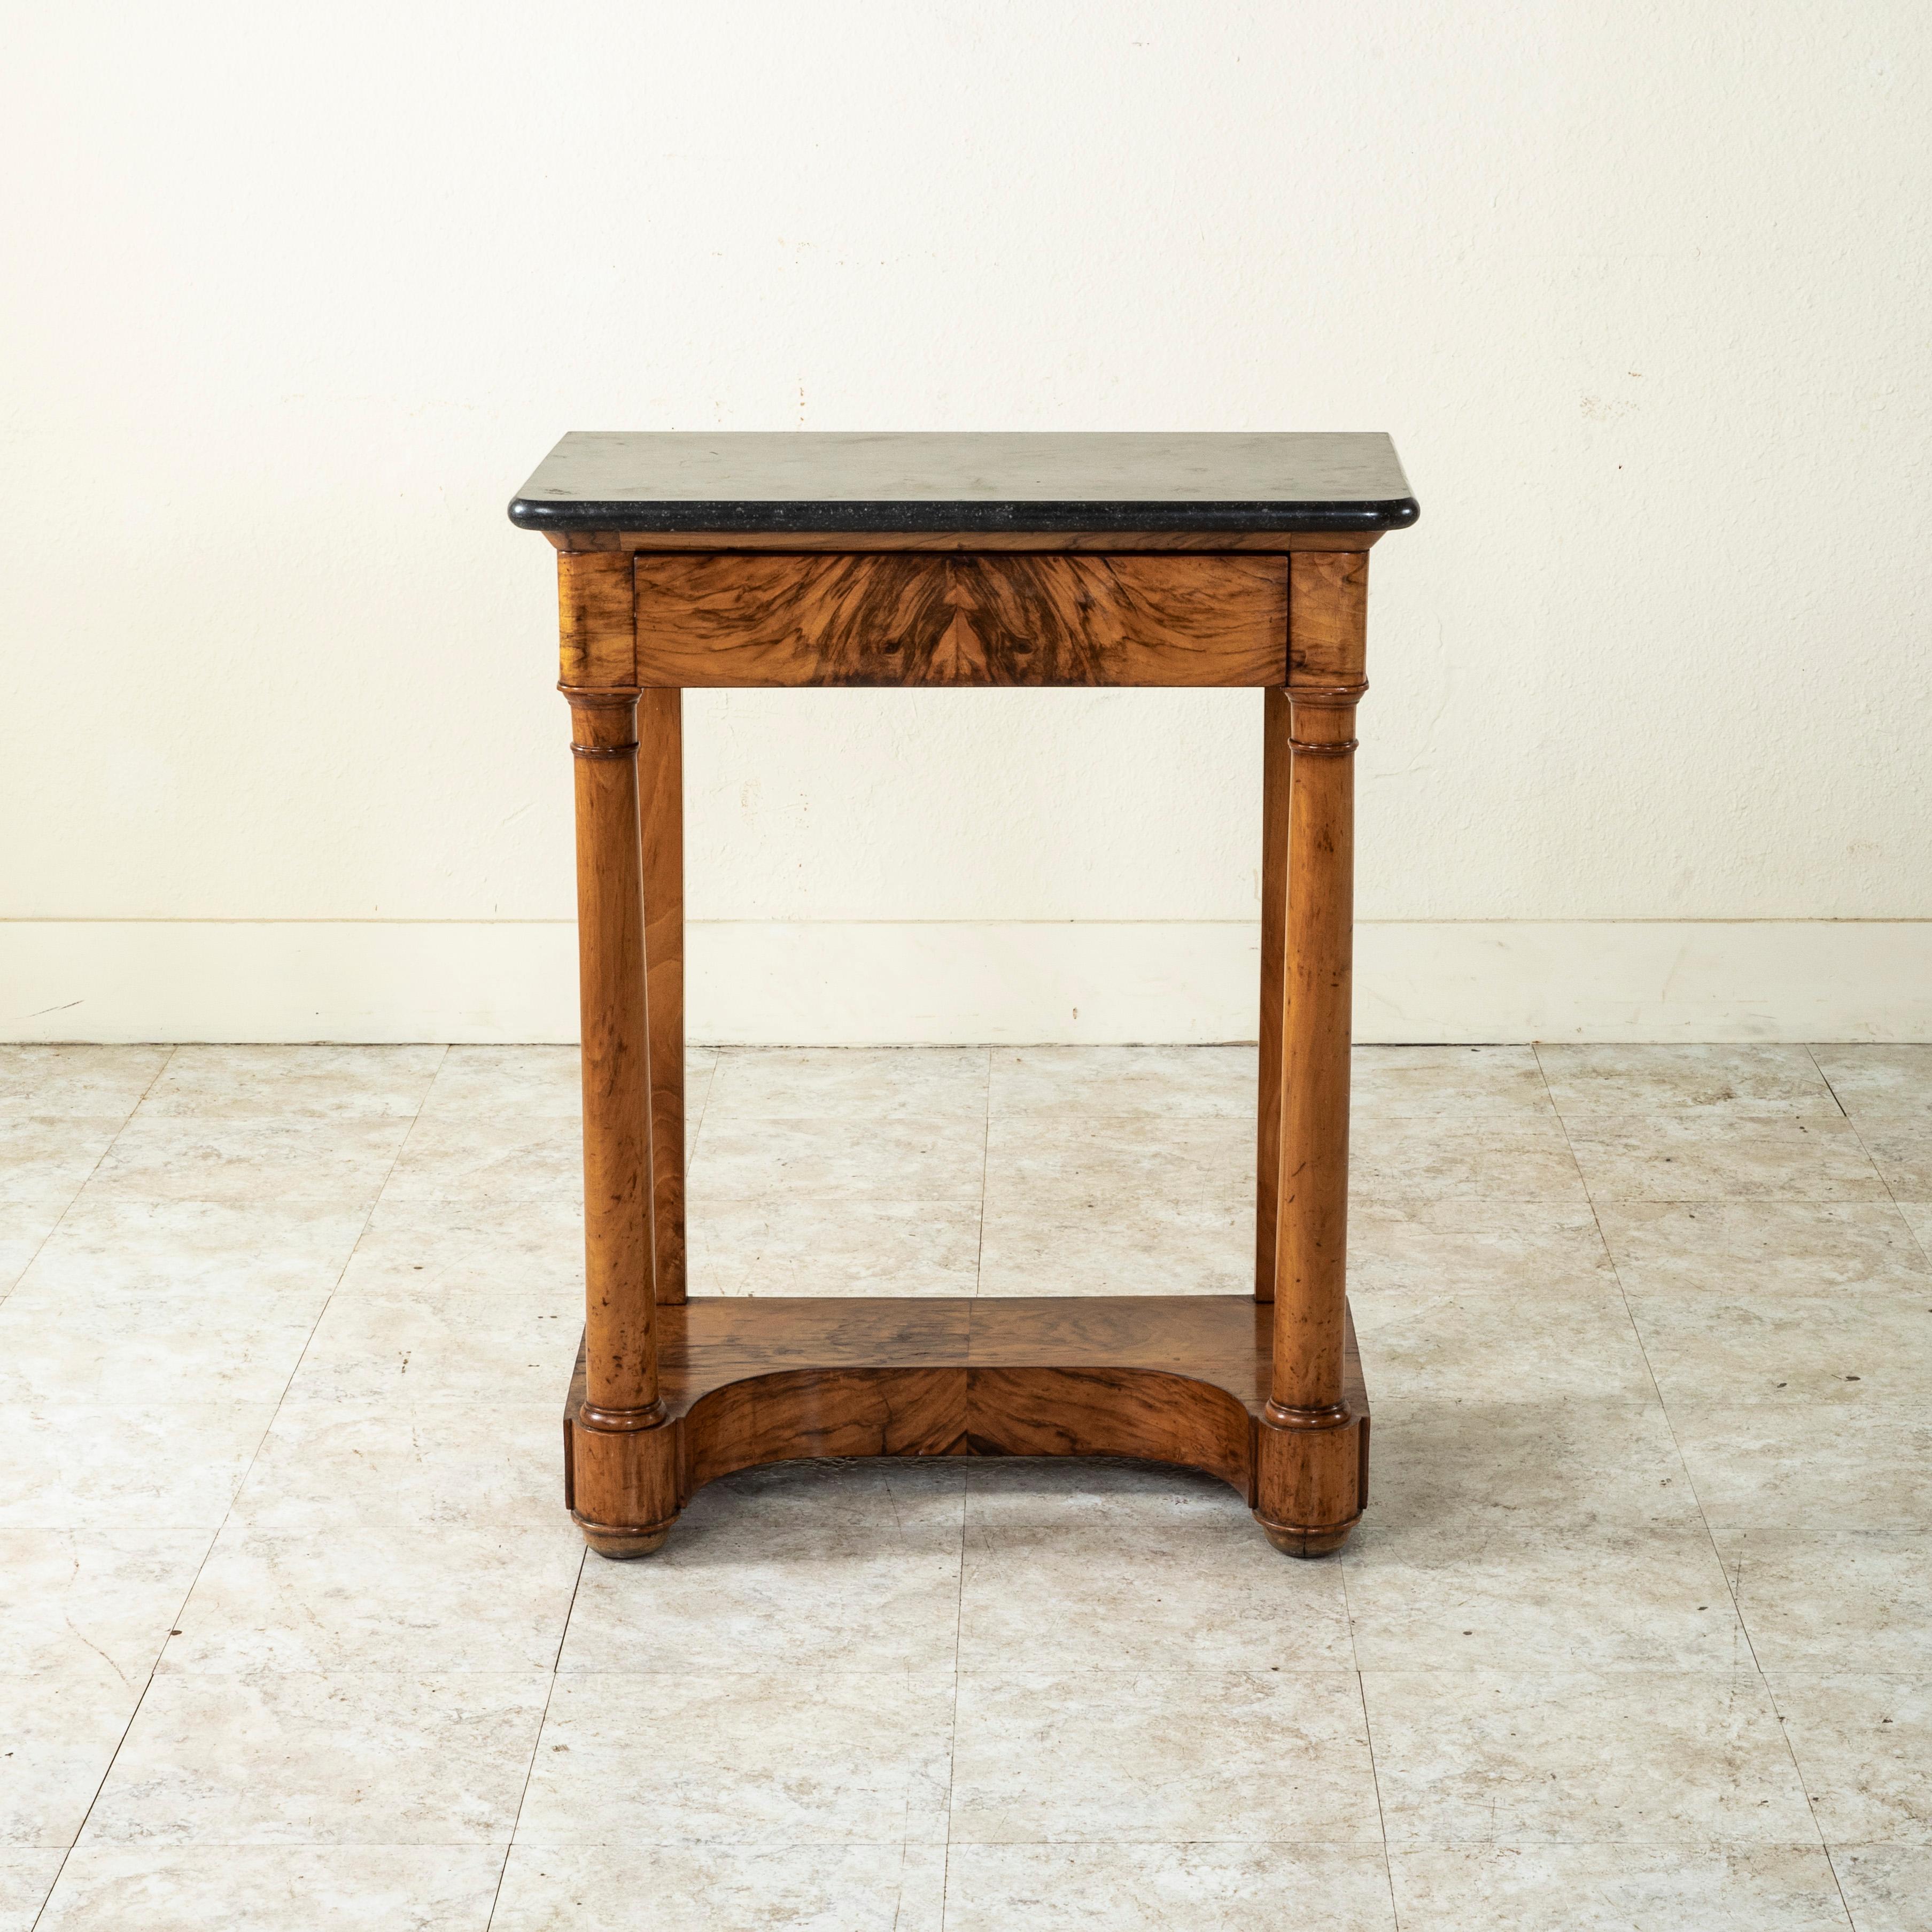 This early nineteenth century French Empire period book matched walnut console table features columns at the front corners and a Saint Anne marble top. A single drawer of dovetail construction fits seamlessly into the apron below the marble. The